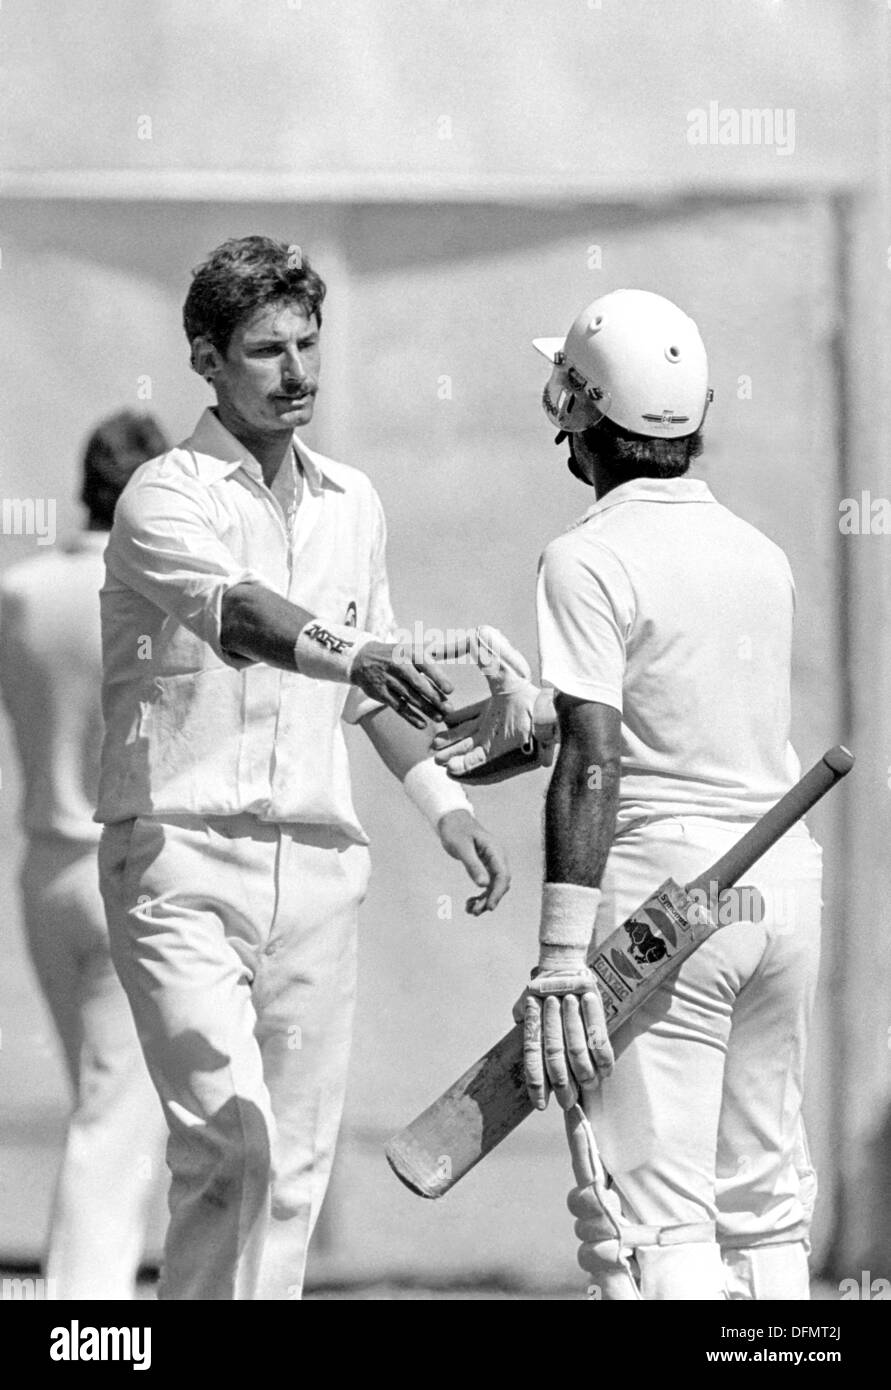 New Zealand bowler Richard Hadlee is congratulated by India's Kris Srikkanth after Hadlee broke the record for the most Test wickets during the first test between India and New Zealand November 12, 1988 in Bangalore, India. Stock Photo